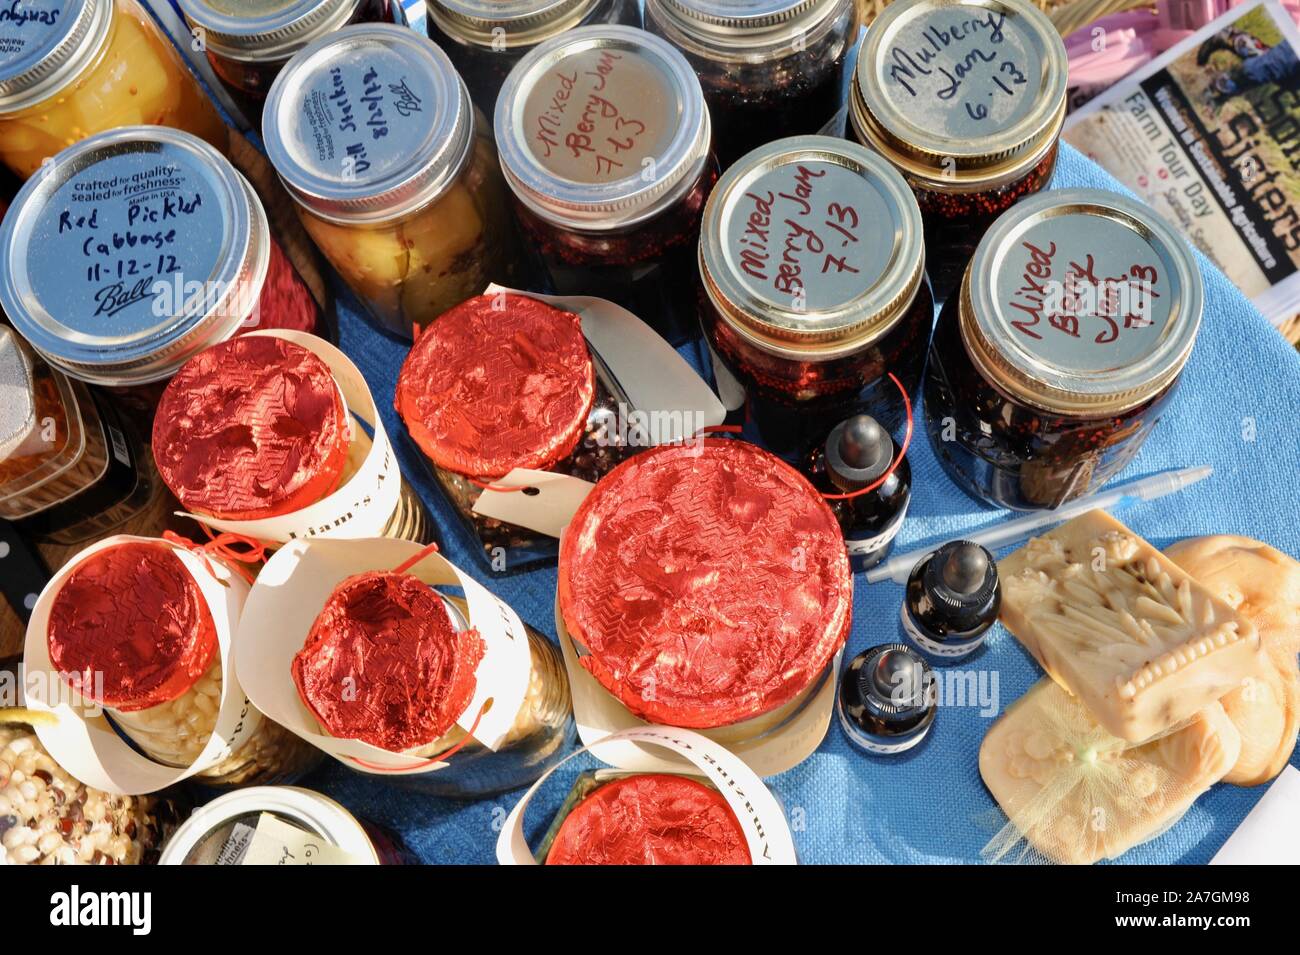 Various kinds of food, including canned items, freely exchanged at a community food swap held in the backyard of a participant's home, Wisconsin, USA Stock Photo